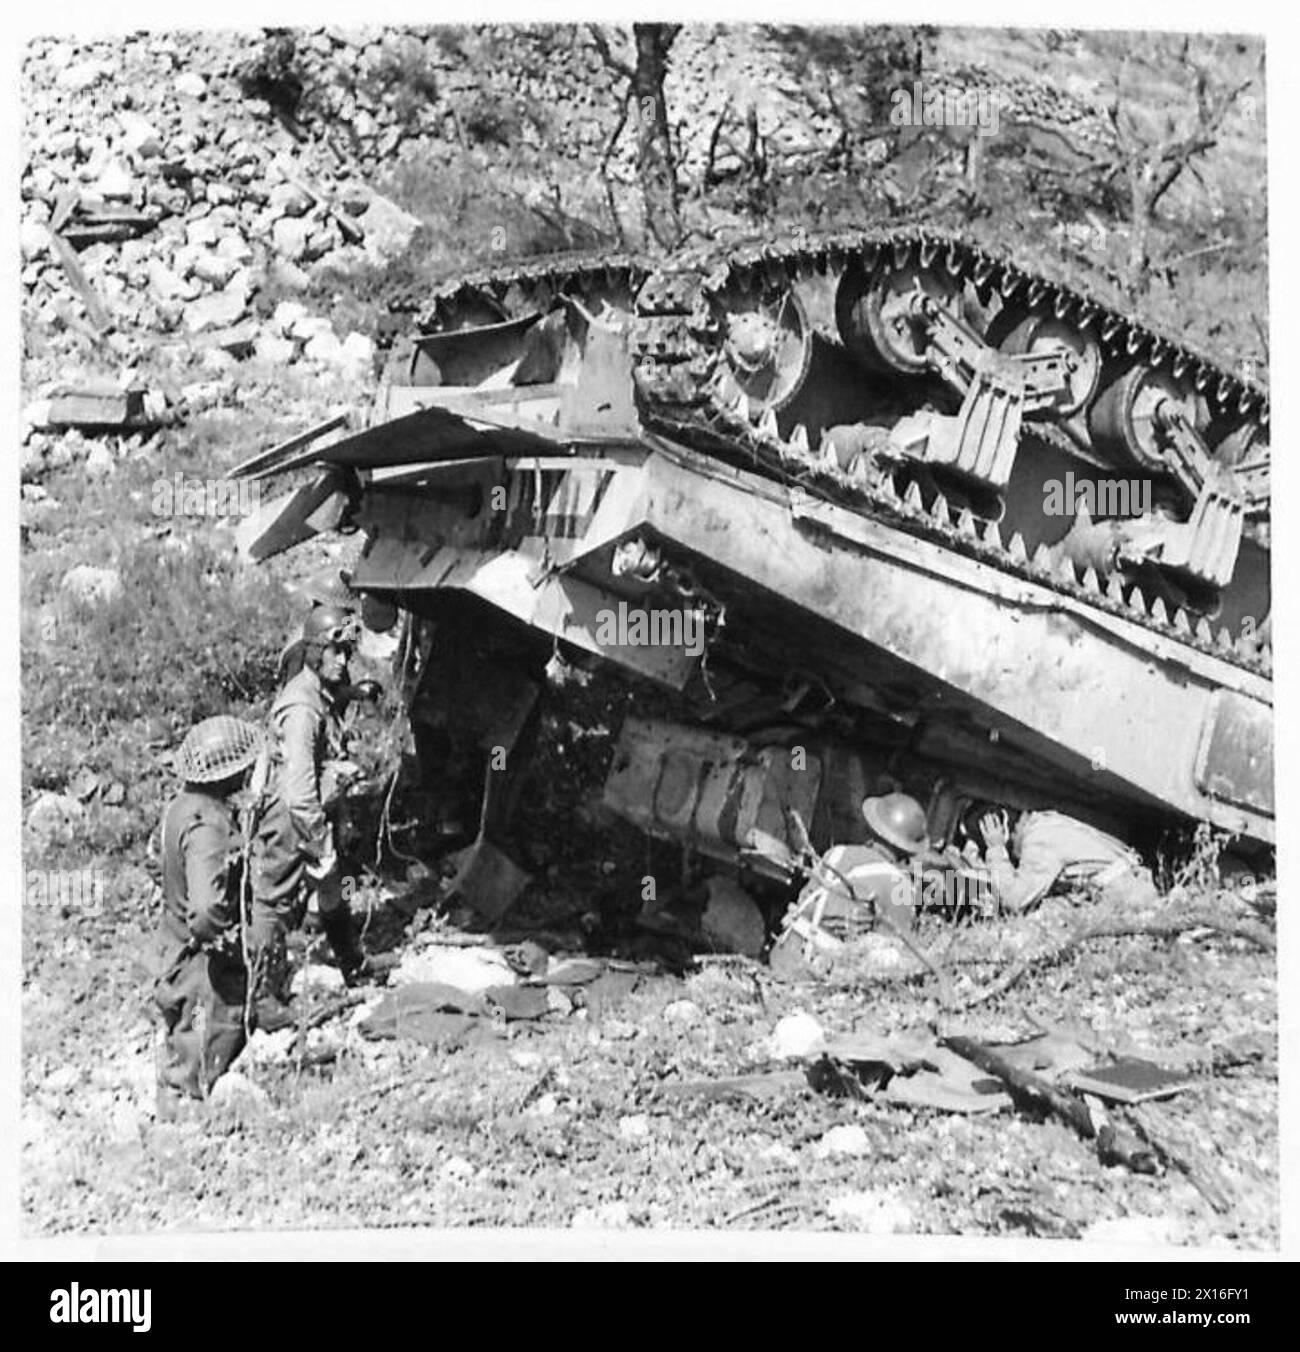 THE POLISH ARMY IN THE ITALIAN CAMPAIGN, 1943-1945 - It's the tank named 'Merkury' commanded by Officer Cadet Aleksander Średnicki. It fell down the ravine while reversing to avoid a German counterattack, instantly killing a gunner, Corporal Adam Antoniuk, wounding Średnicki and tank's radiooperator, Private Święcicki. Two drivers (possibly featured in the photograph), Lance Corporals Józef Boryczko and Juliusz Matzenauer, survived the fall although Matzenauer was killed by a mortar grenade a few minutes later. Overturned Sherman tank of the 3rd Squadron, 6th Armoured Regiment (2nd Warsaw Armo Stock Photo